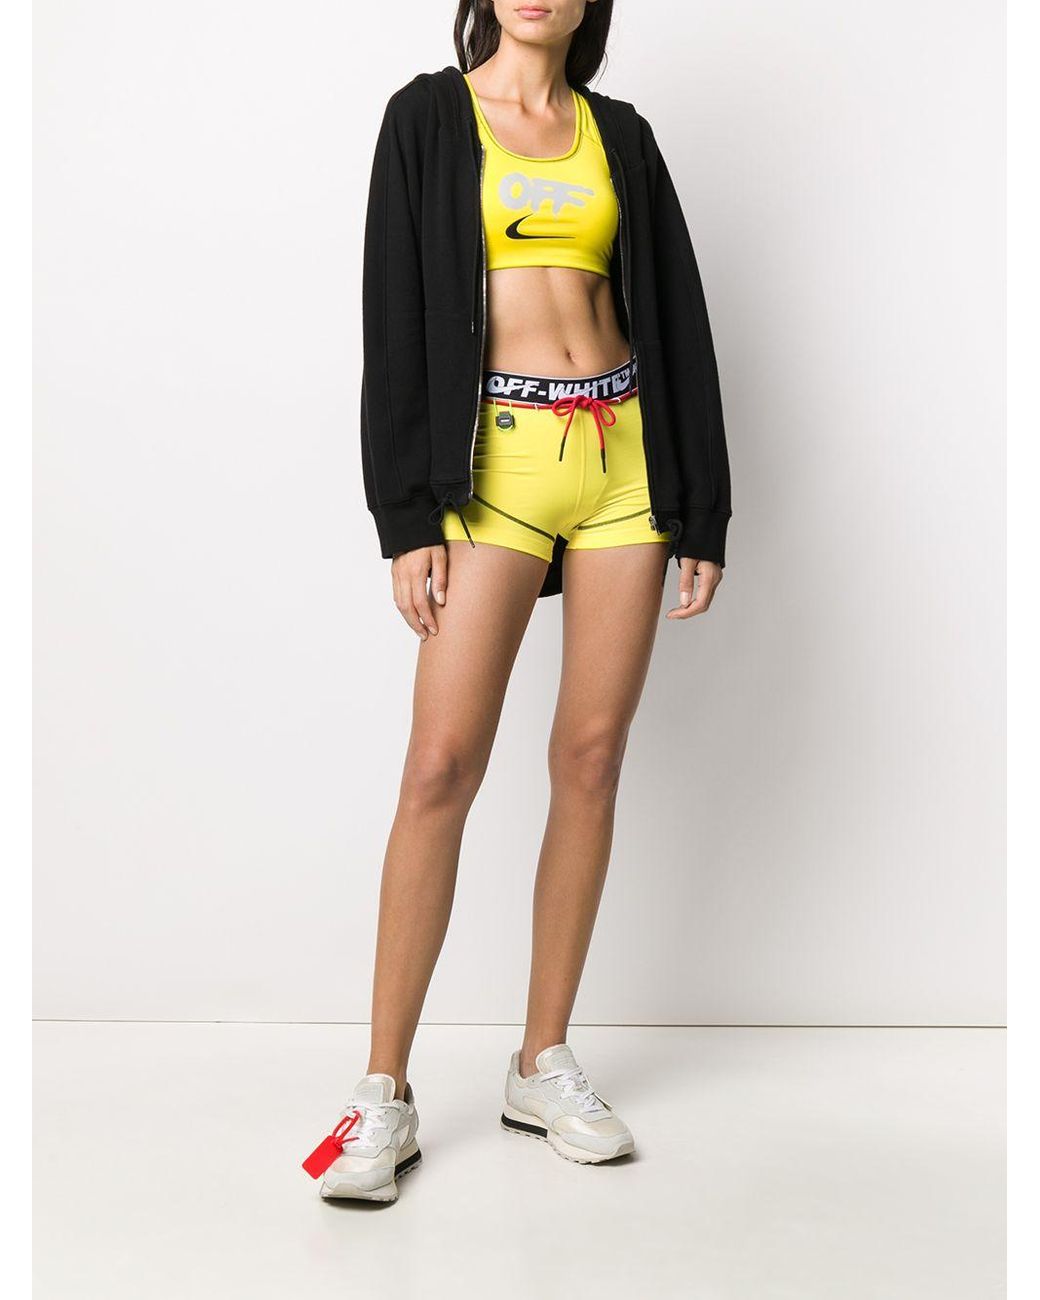 NIKE X OFF-WHITE Nrg Ru Pro Shorts in Yellow | Lyst